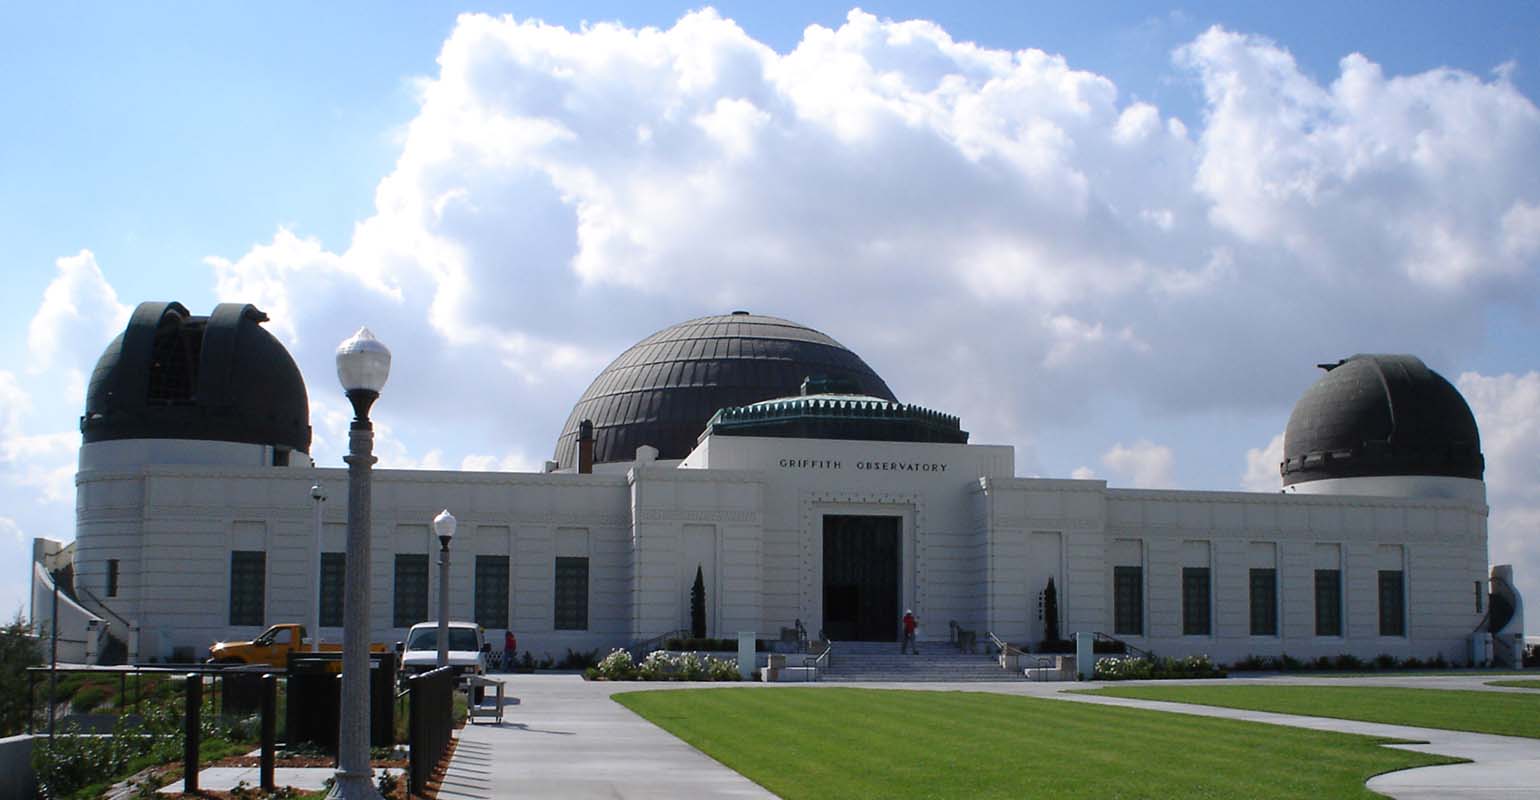 The Griffith Observatory in Los Angeles, California.